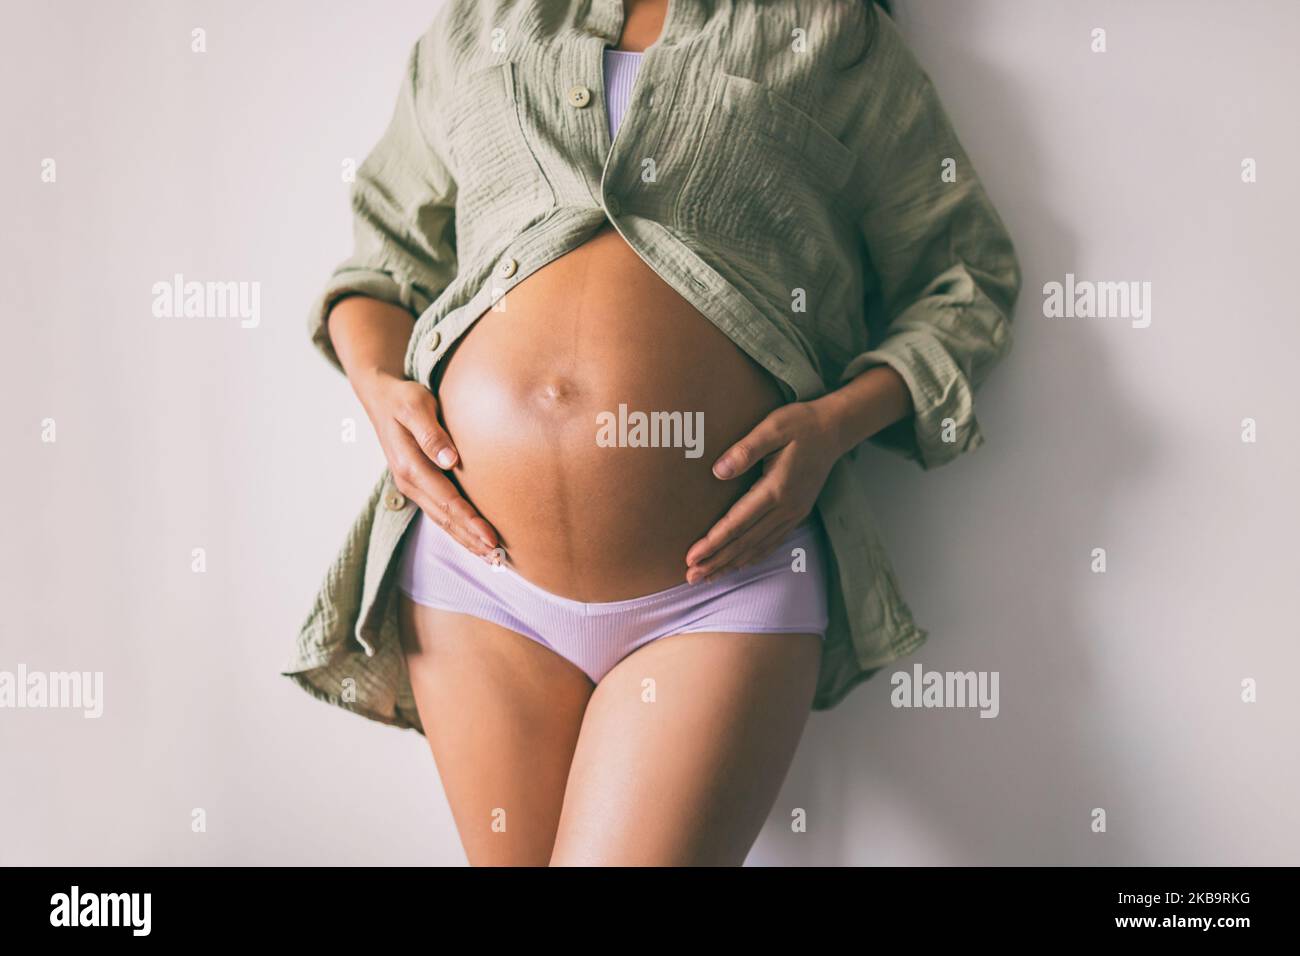 Pregnancy belly closeup. Pregnant woman wearing underwear and casual cotton shirt at home relaxing holding expecting tummy for skincare, health Stock Photo